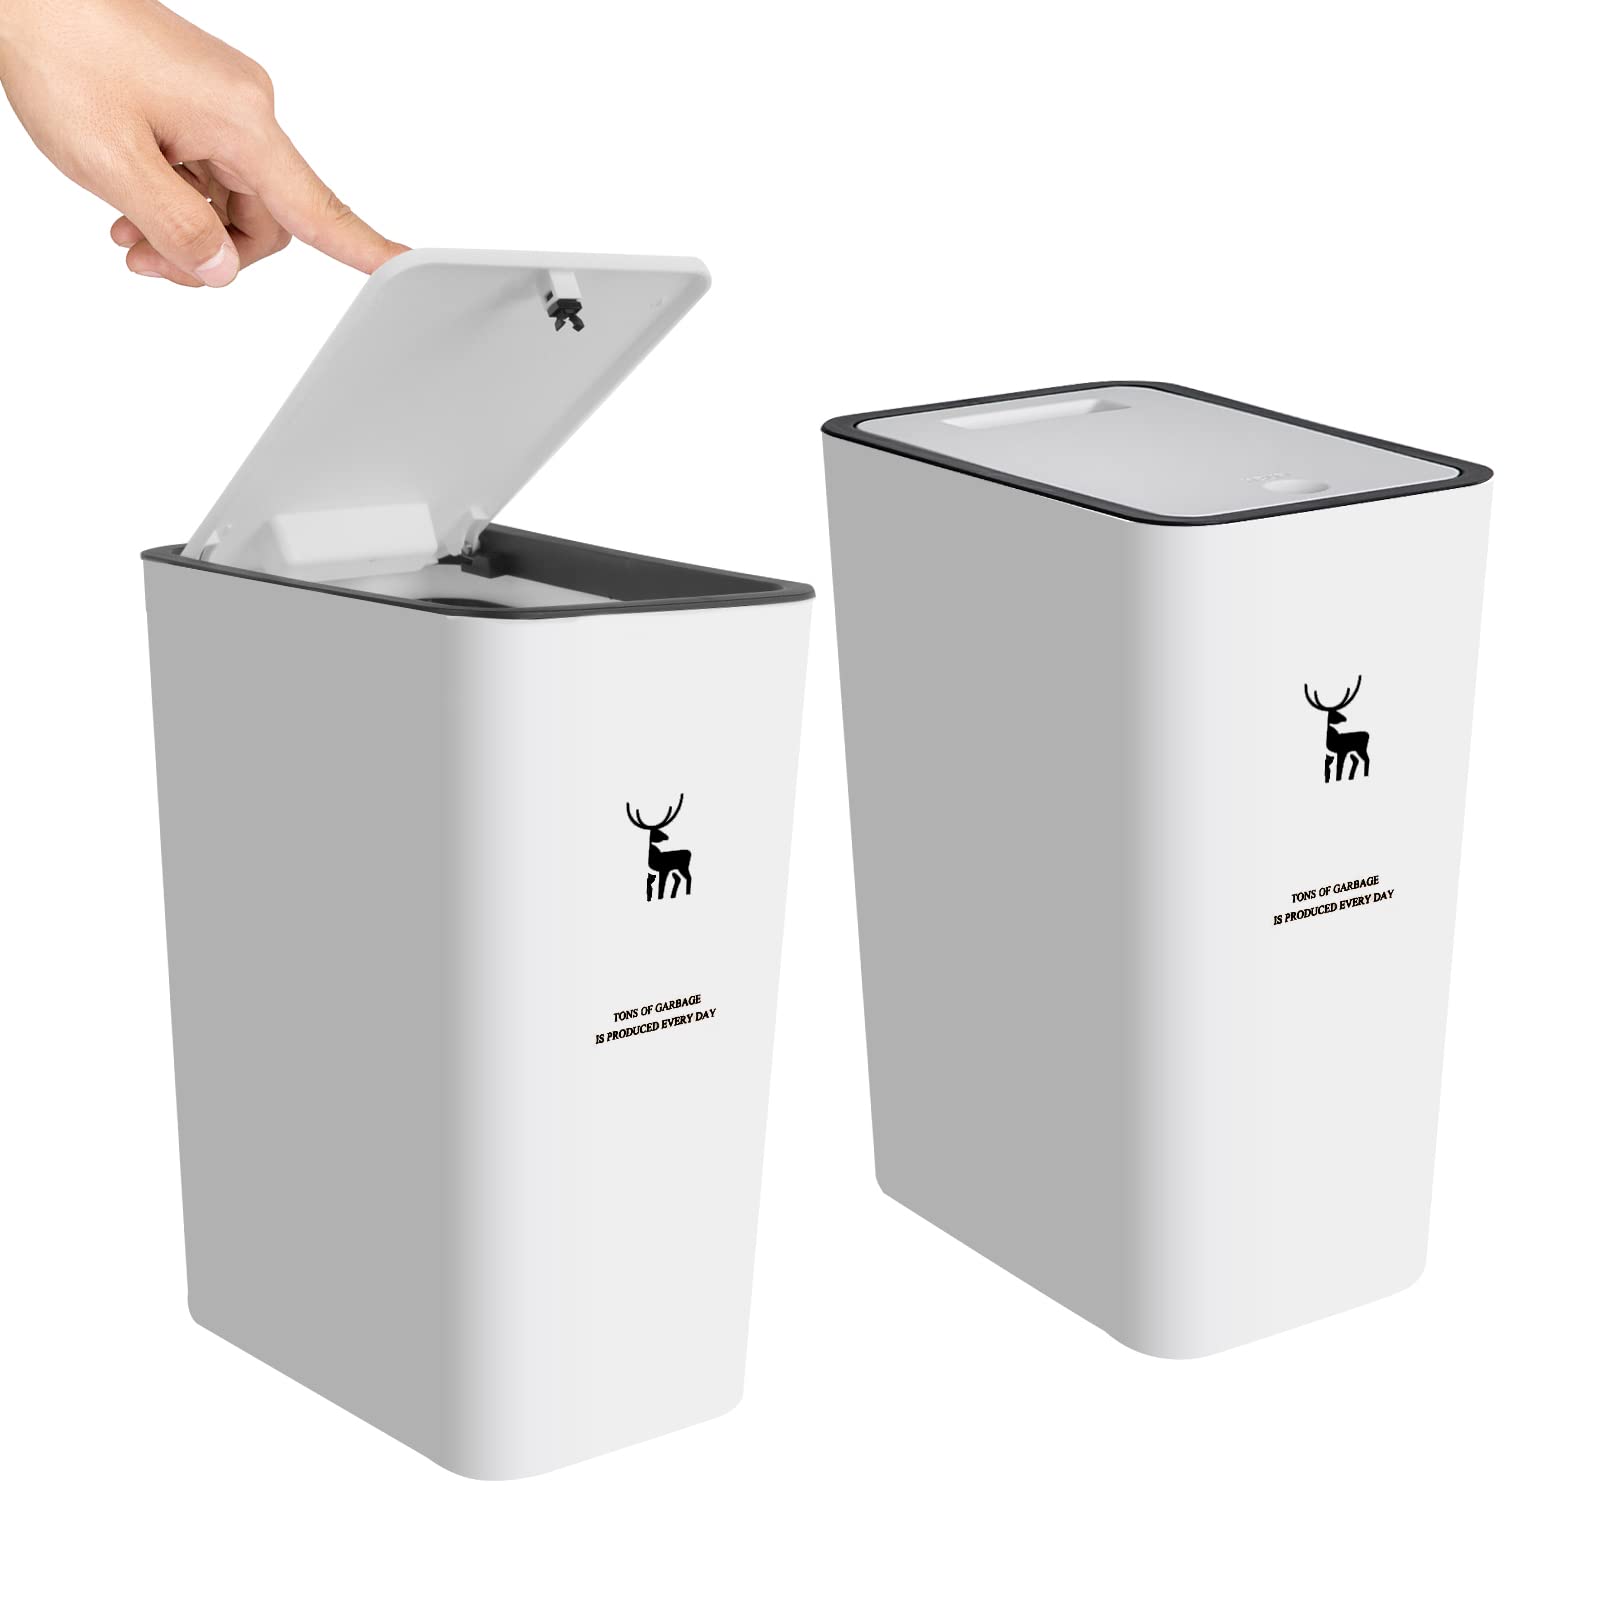 XPIY Trash Can with Lid